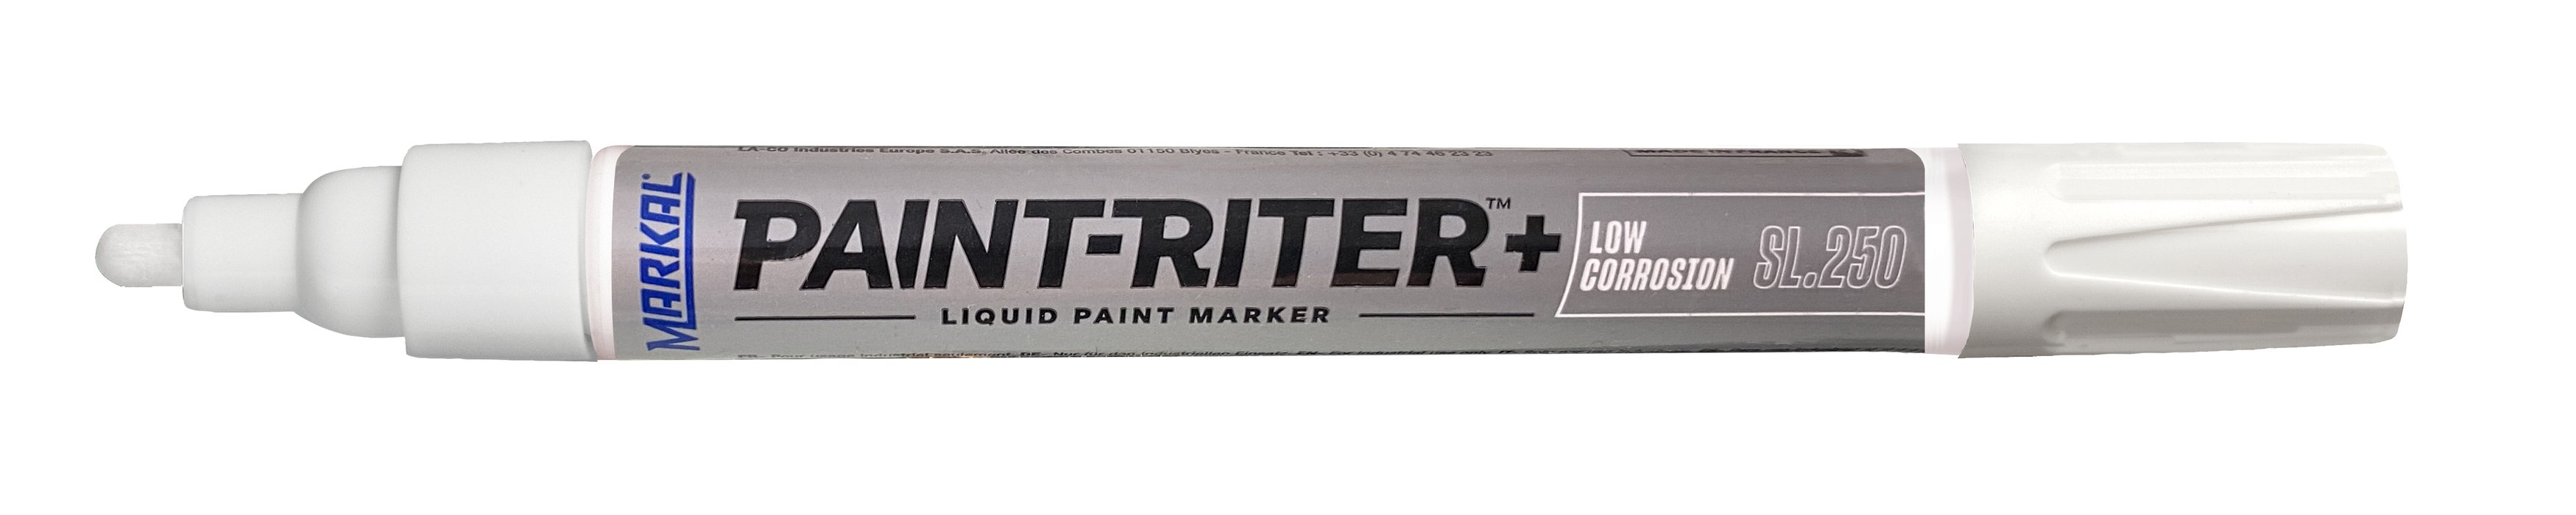 PAINT-RITER+ LOW CORROSION SL250